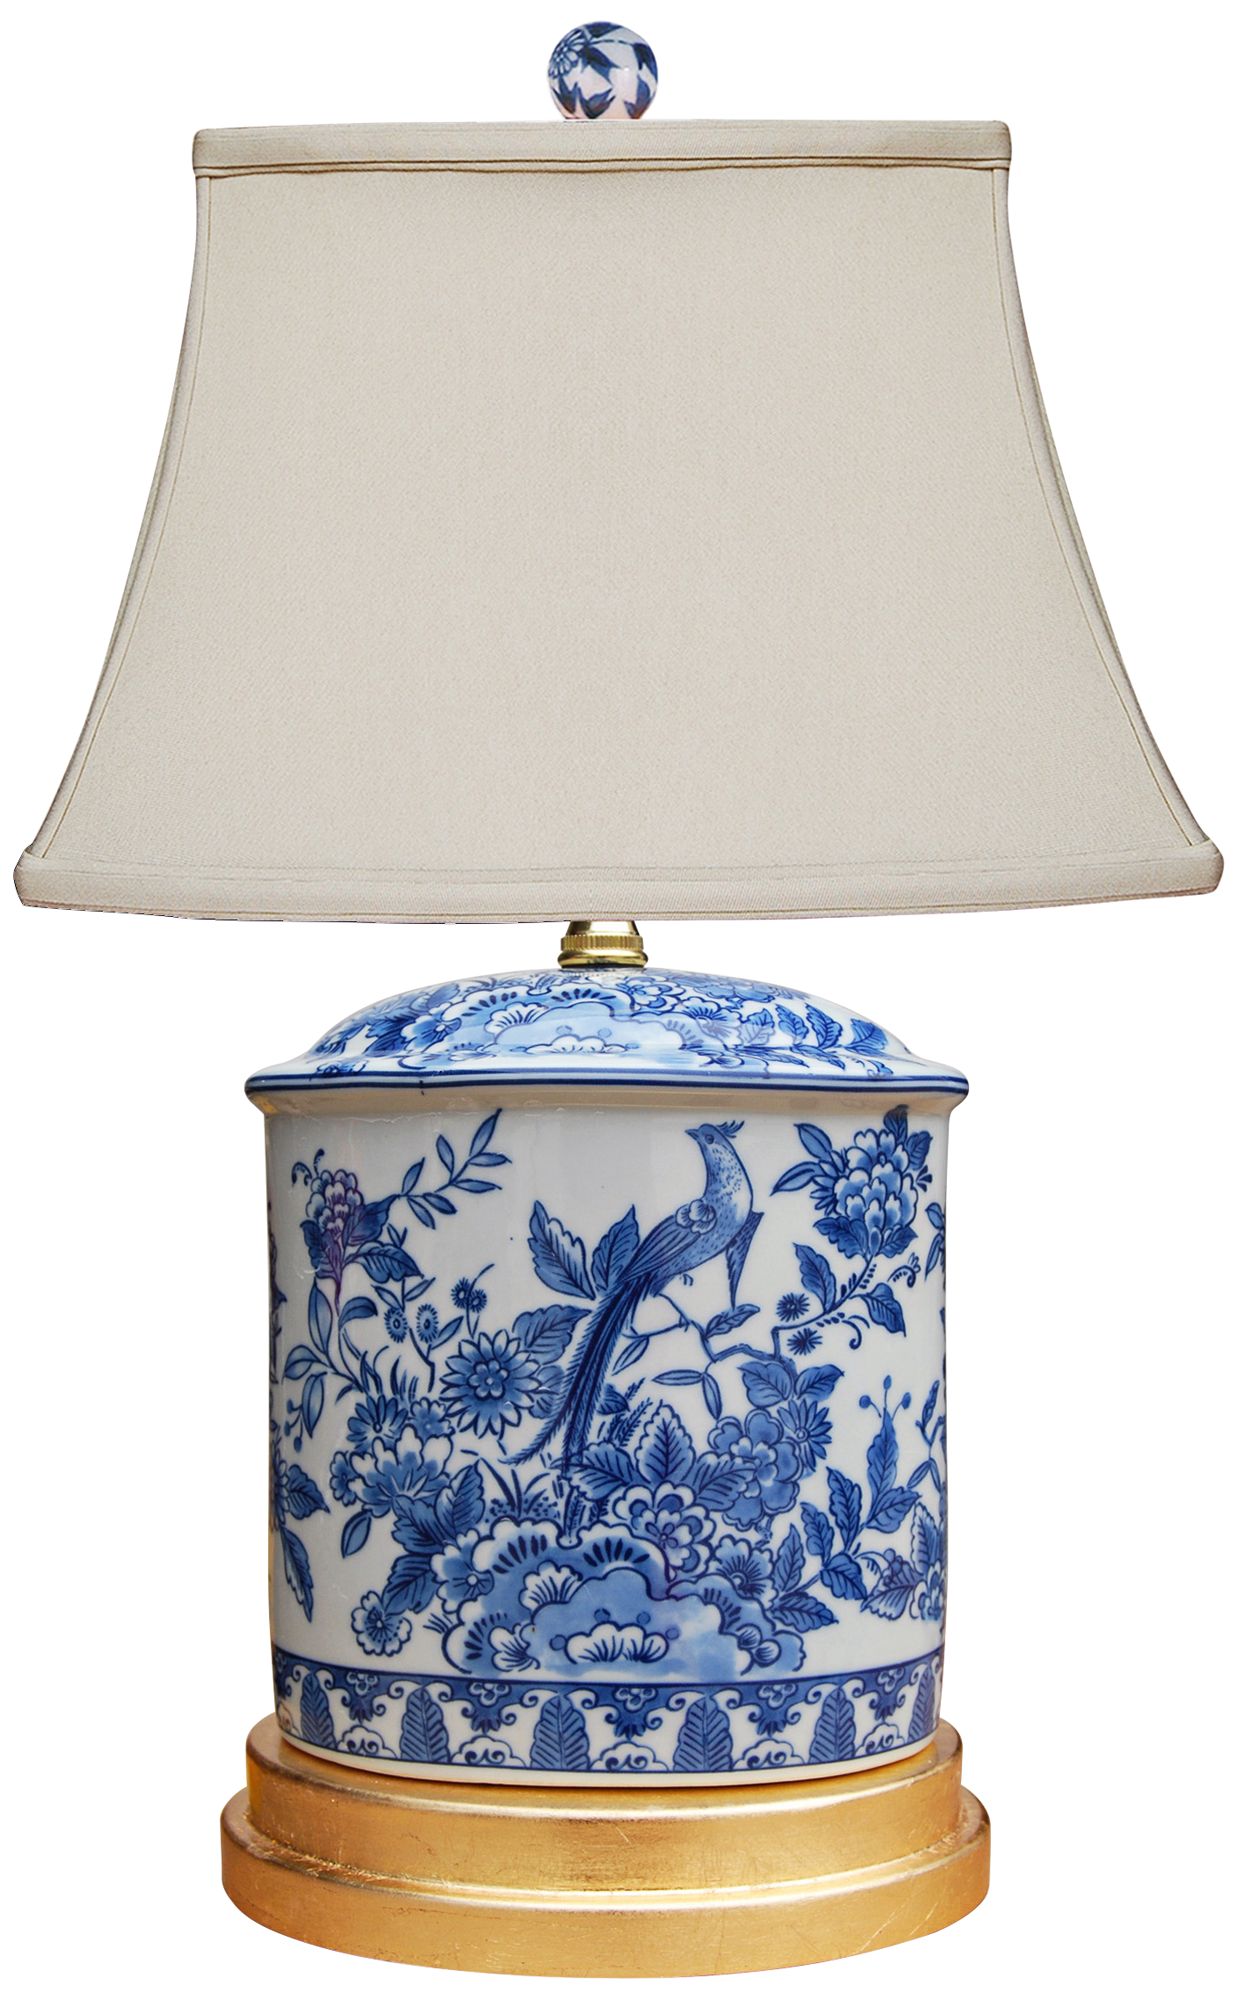 Sirah 19 1/2"H Blue White English Oval Urn Accent Table Lamp